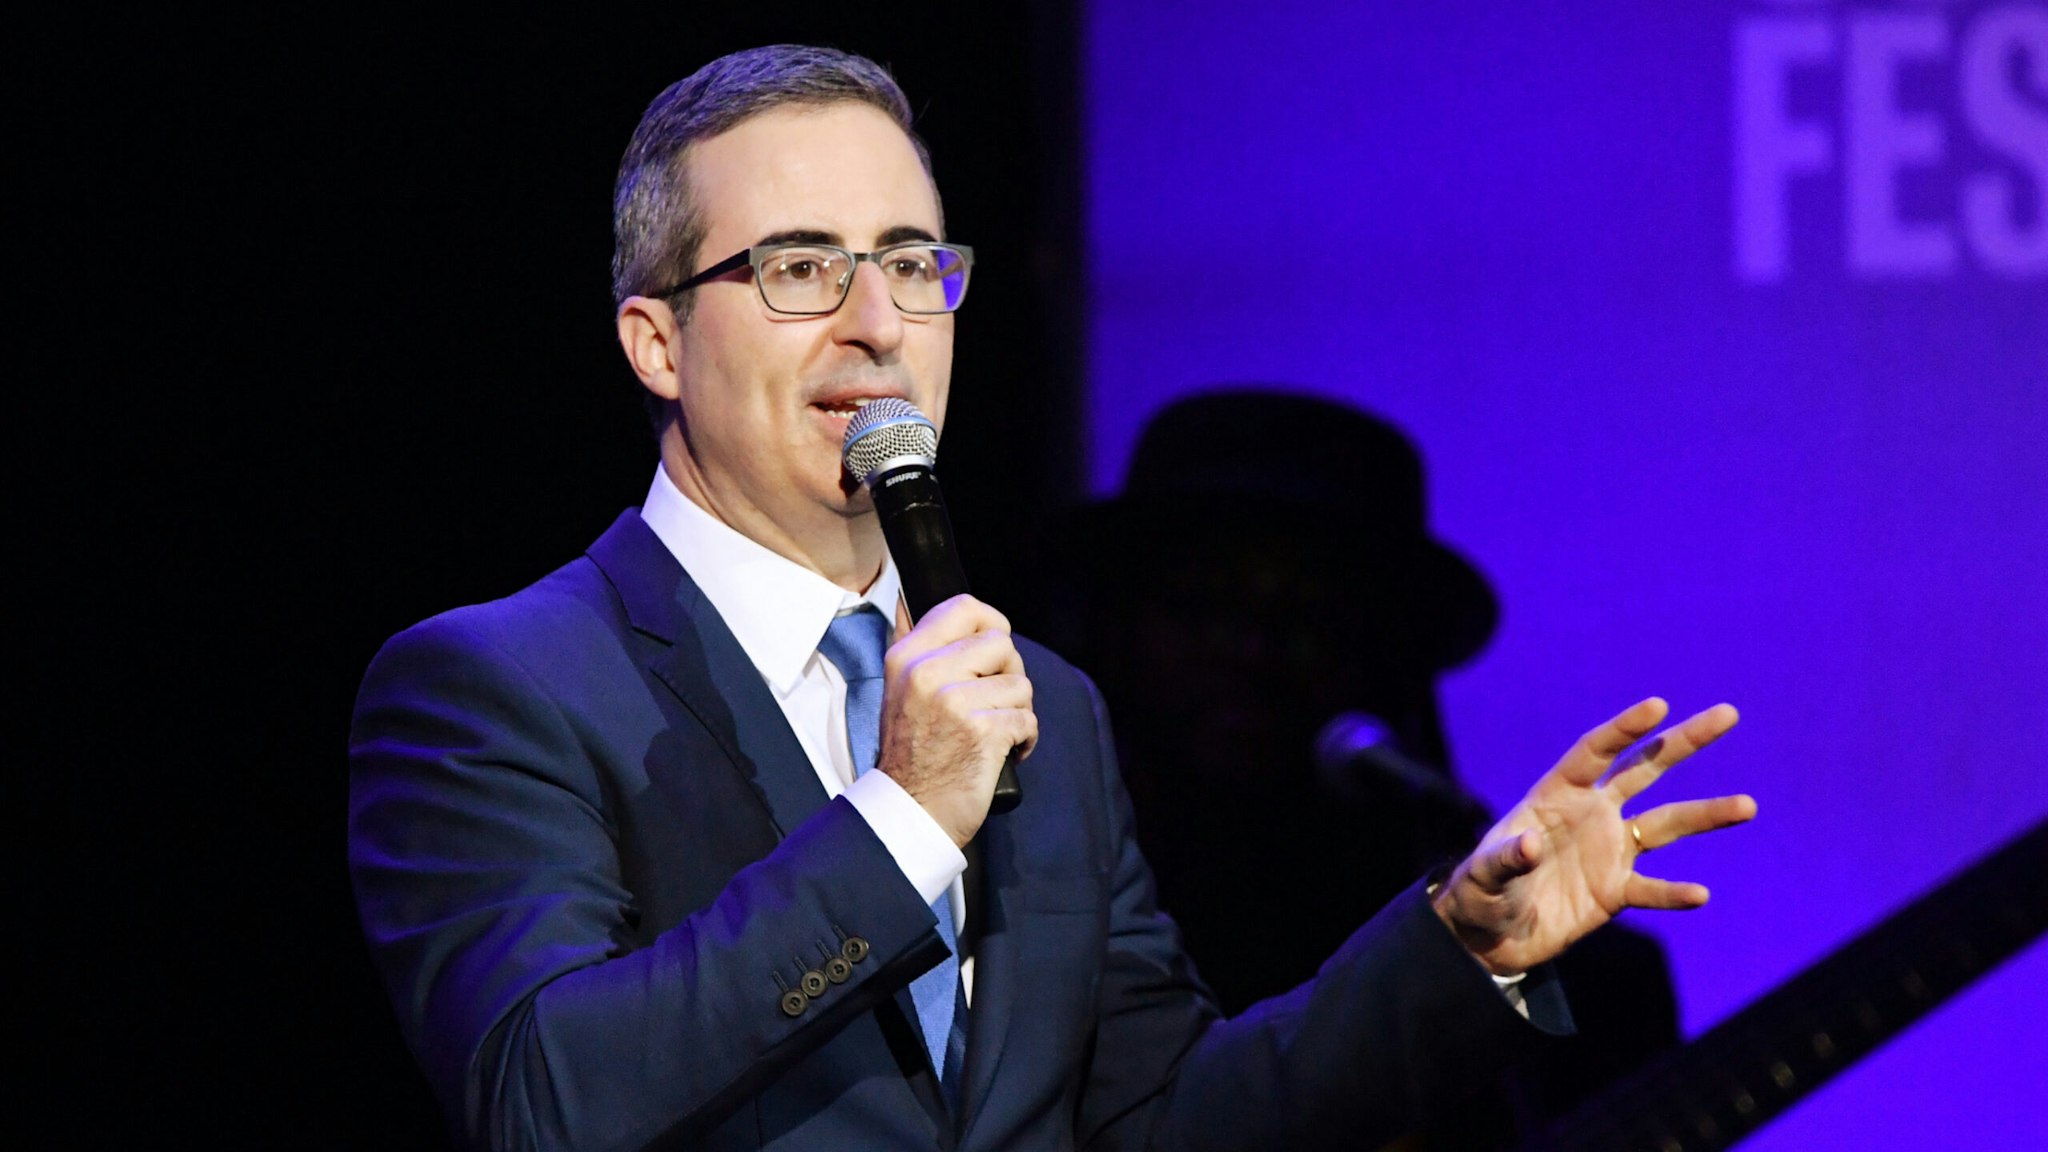 John Oliver performs onstage during the 13th annual Stand Up for Heroes to benefit the Bob Woodruff Foundation at The Hulu Theater at Madison Square Garden on November 04, 2019 in New York City.